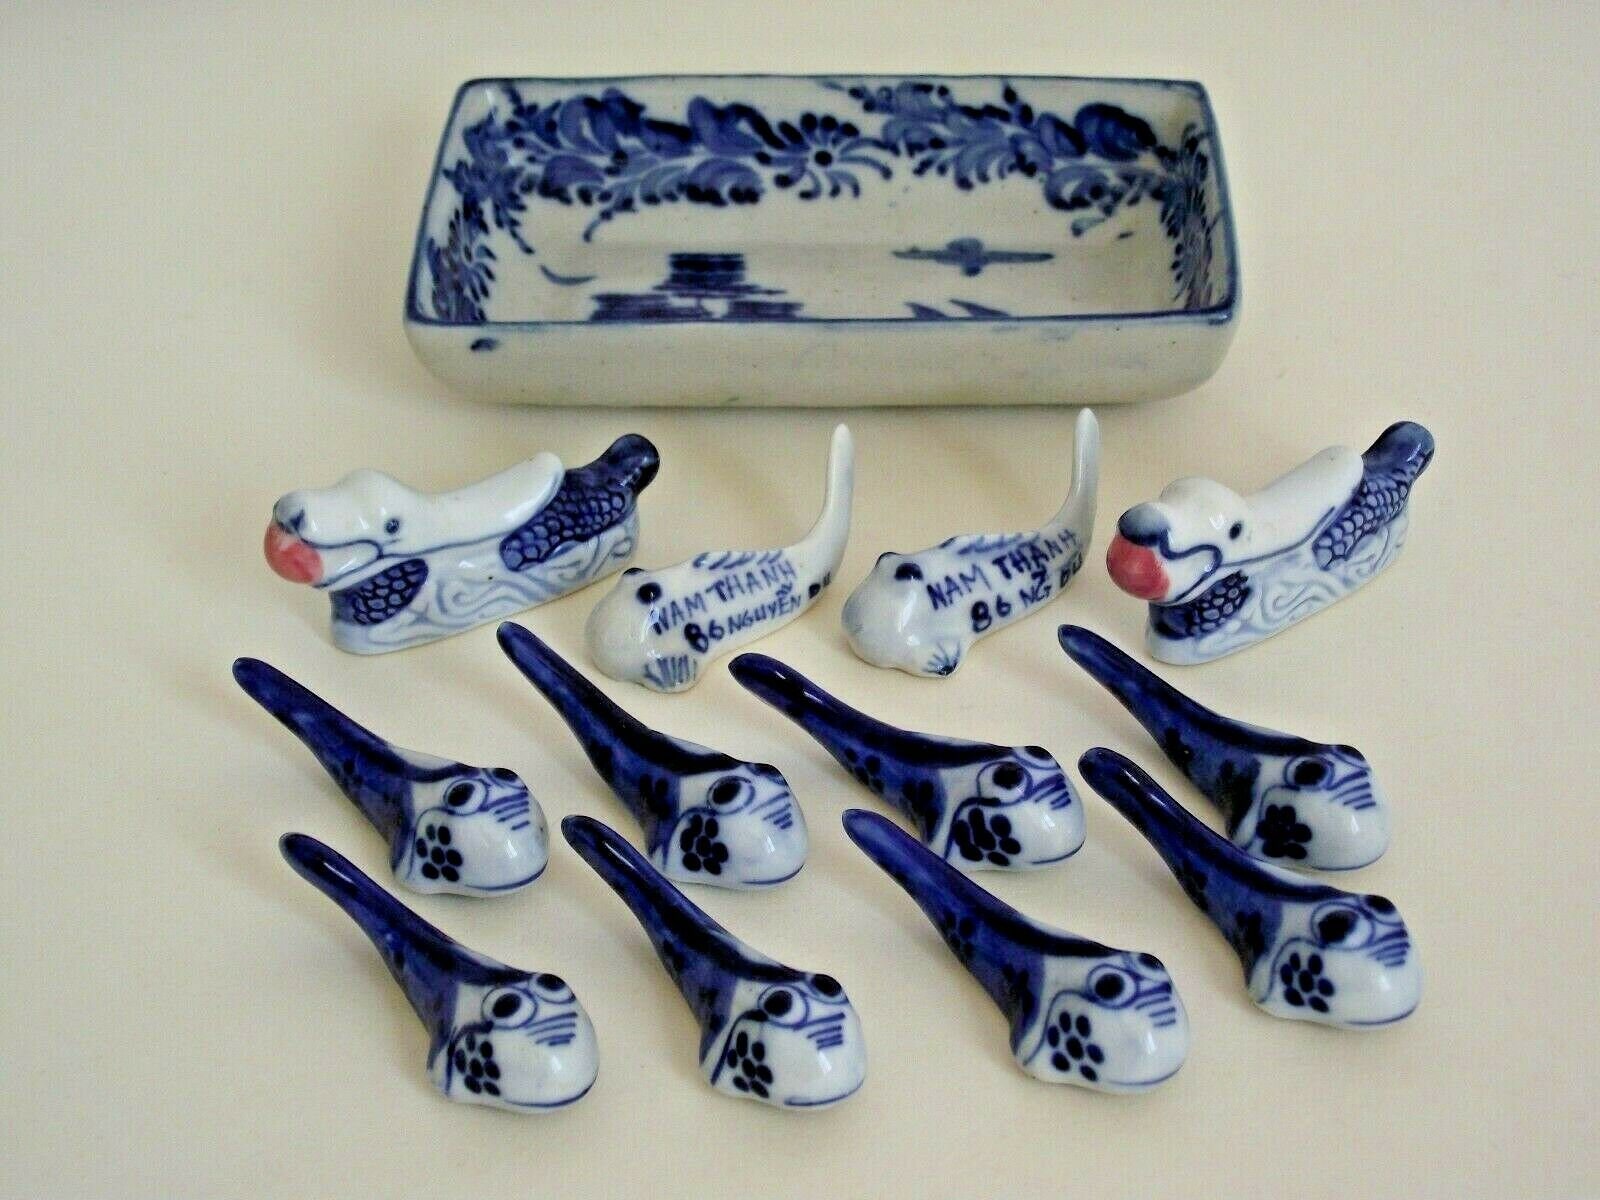 12 Blue & White Pottery Fish Shaped Chopstick Cutlery Stands & Tray - Couverts Vietnamiens. Vietnami